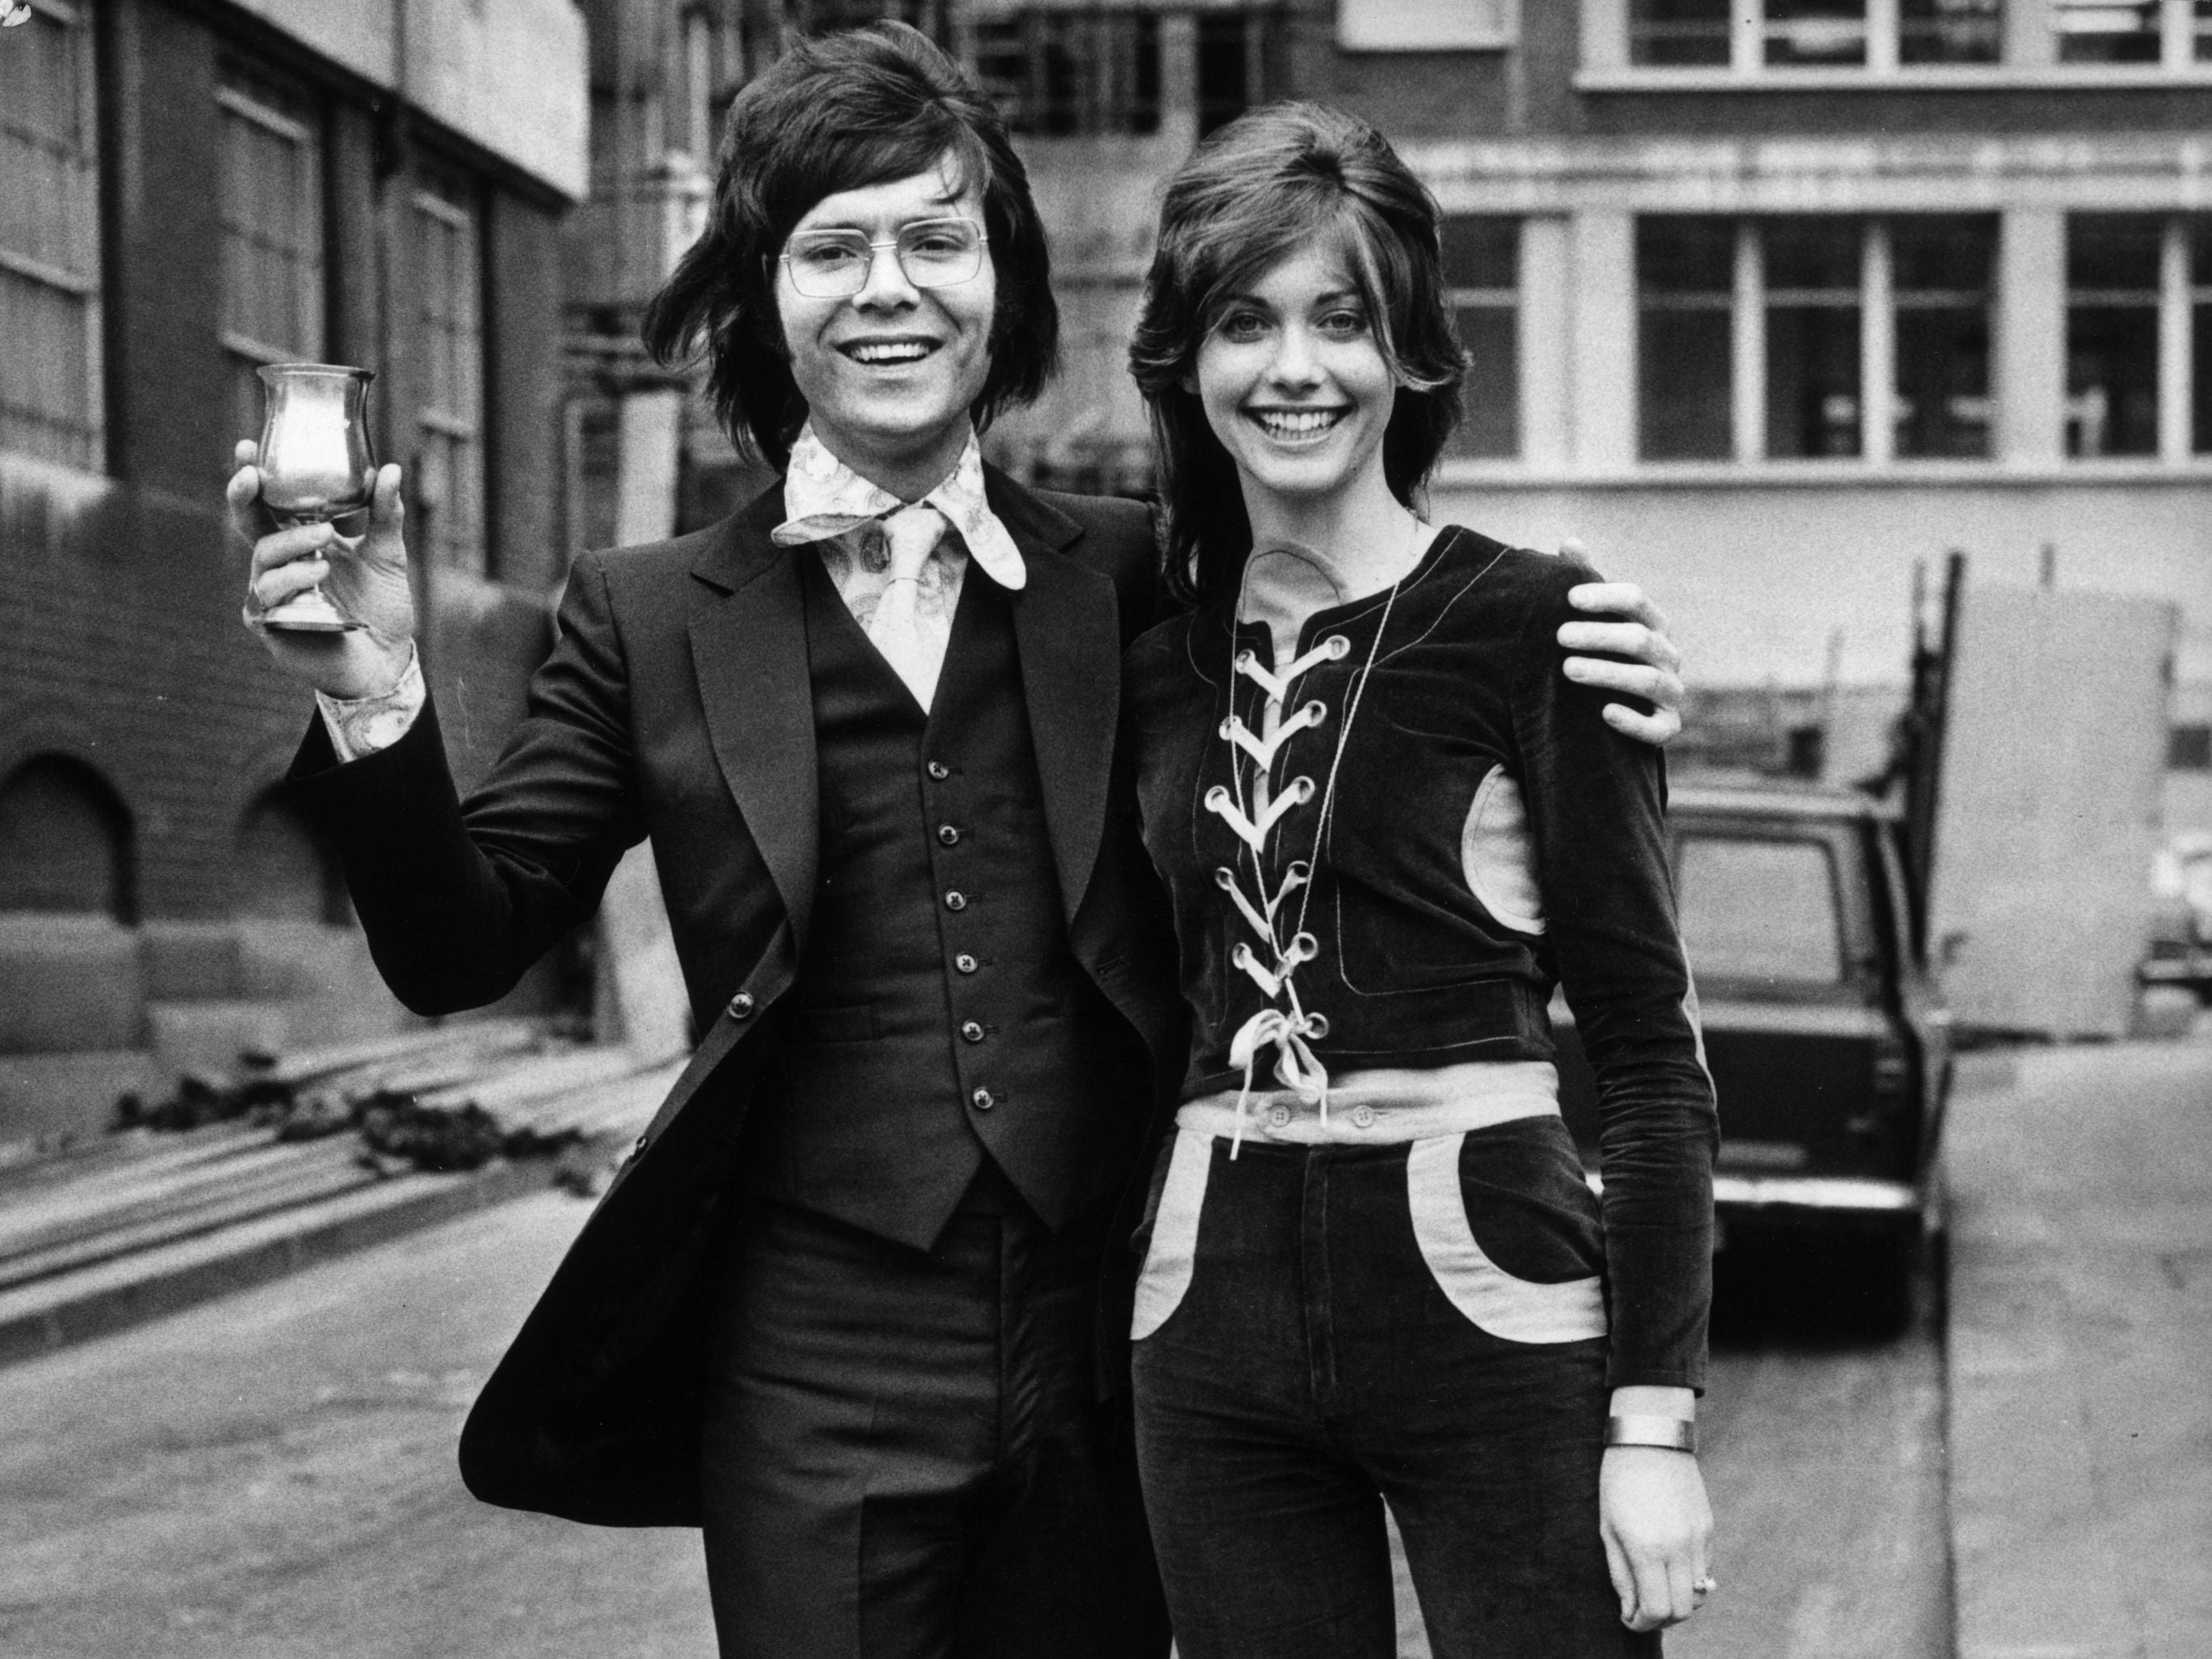 In the early Seventies, Newton-John made frequent appearances on Cliff Richard’s weekly TV show ‘It’s Cliff Richard’